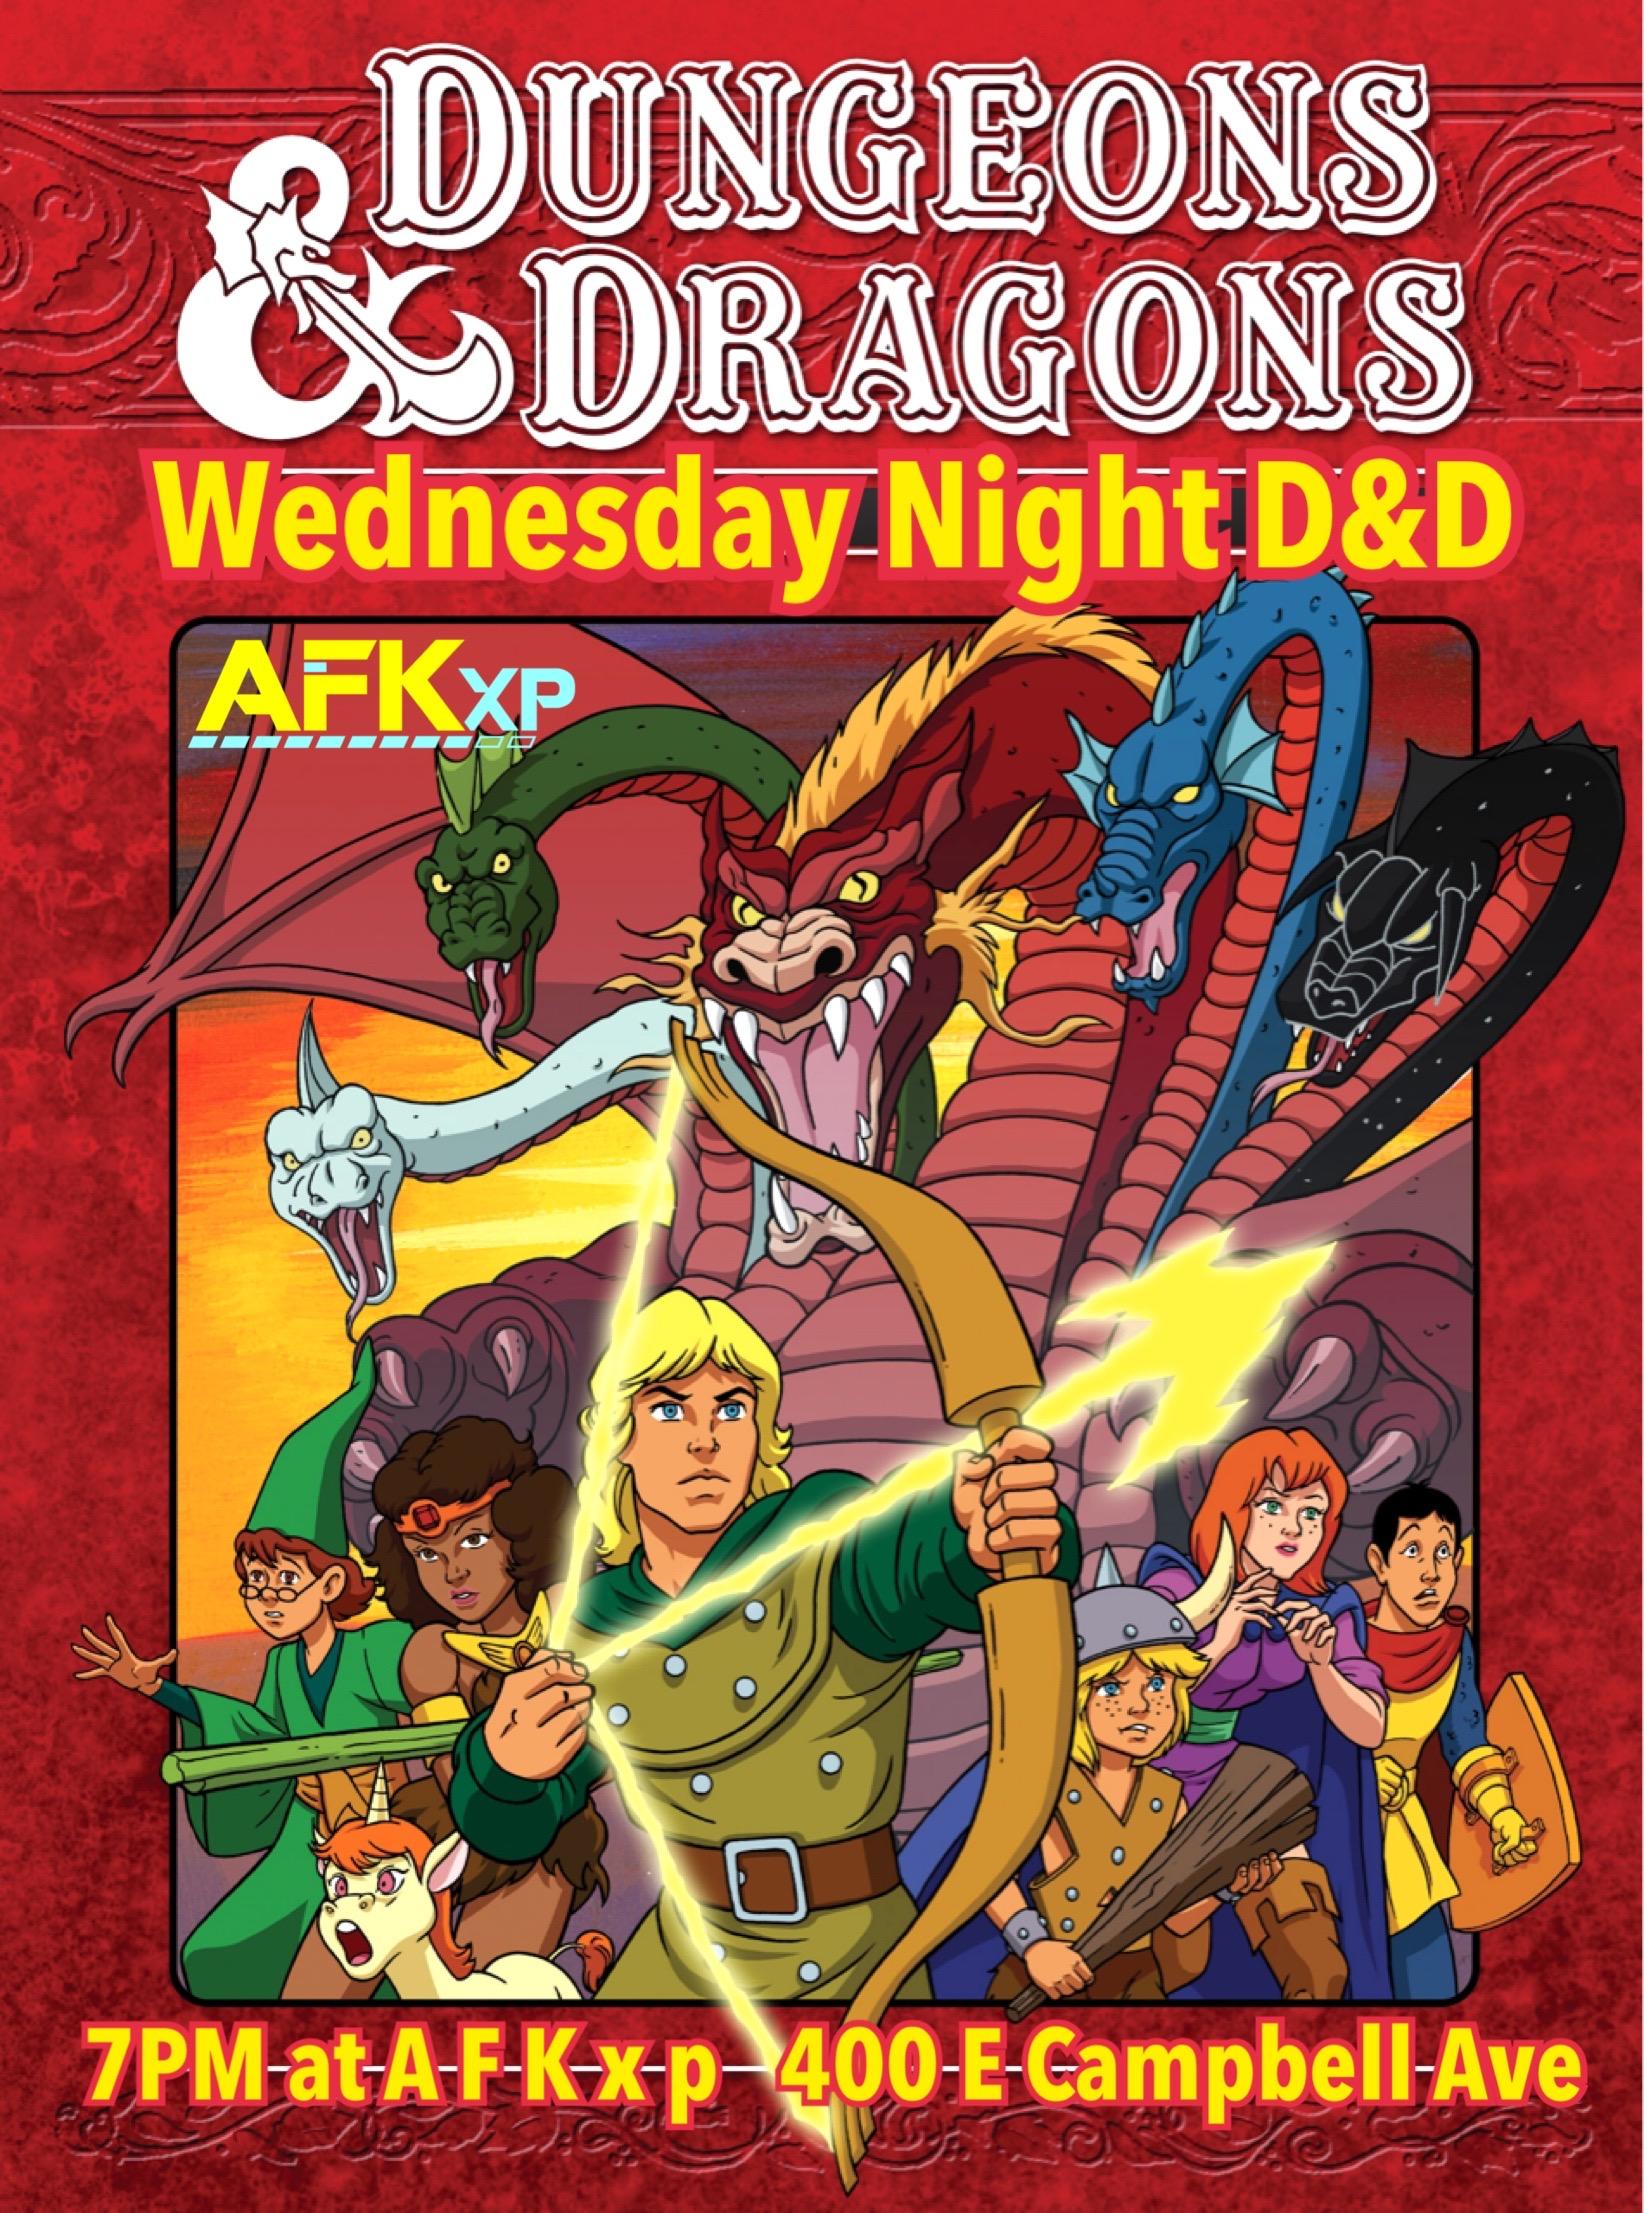 Wednesday Night Dungeons & Dragons at AFKxp